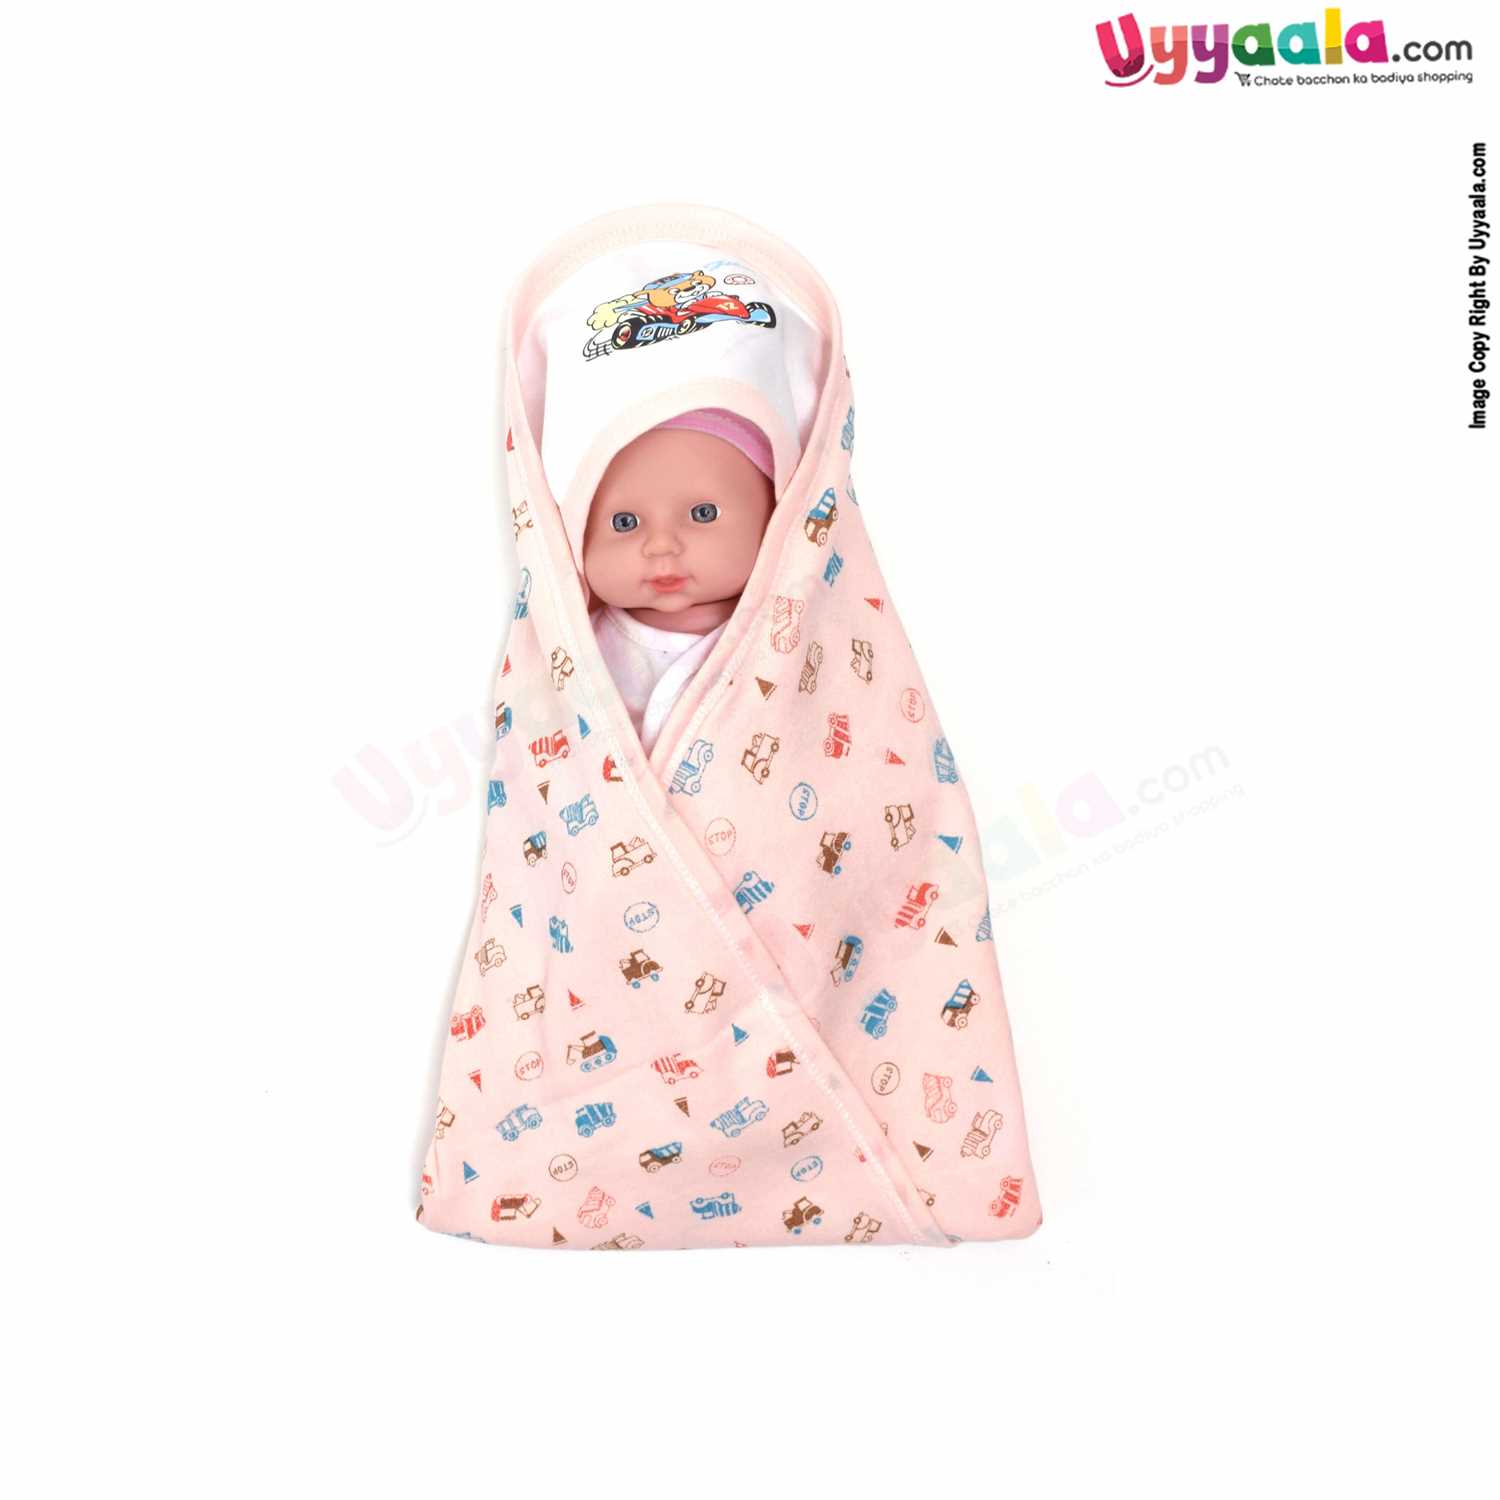 Baby Terry Hooded Towel with Trucks Print 0+m Age